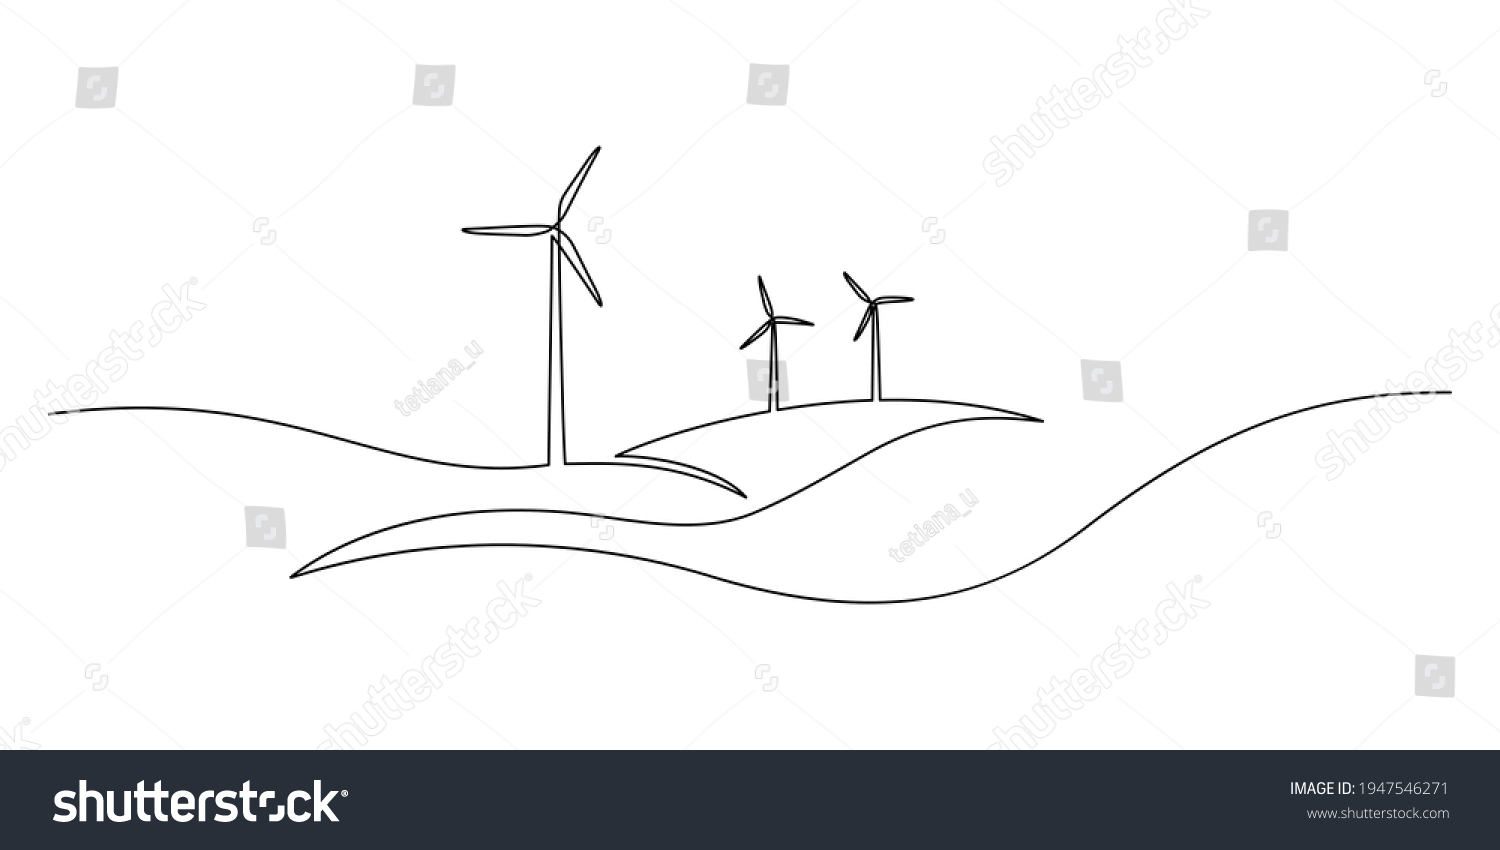 Wind energy in continuous line art drawing style. Hilly landscape with wind turbines producing electricity. Renewable source of power. Black linear design isolated on white background #1947546271